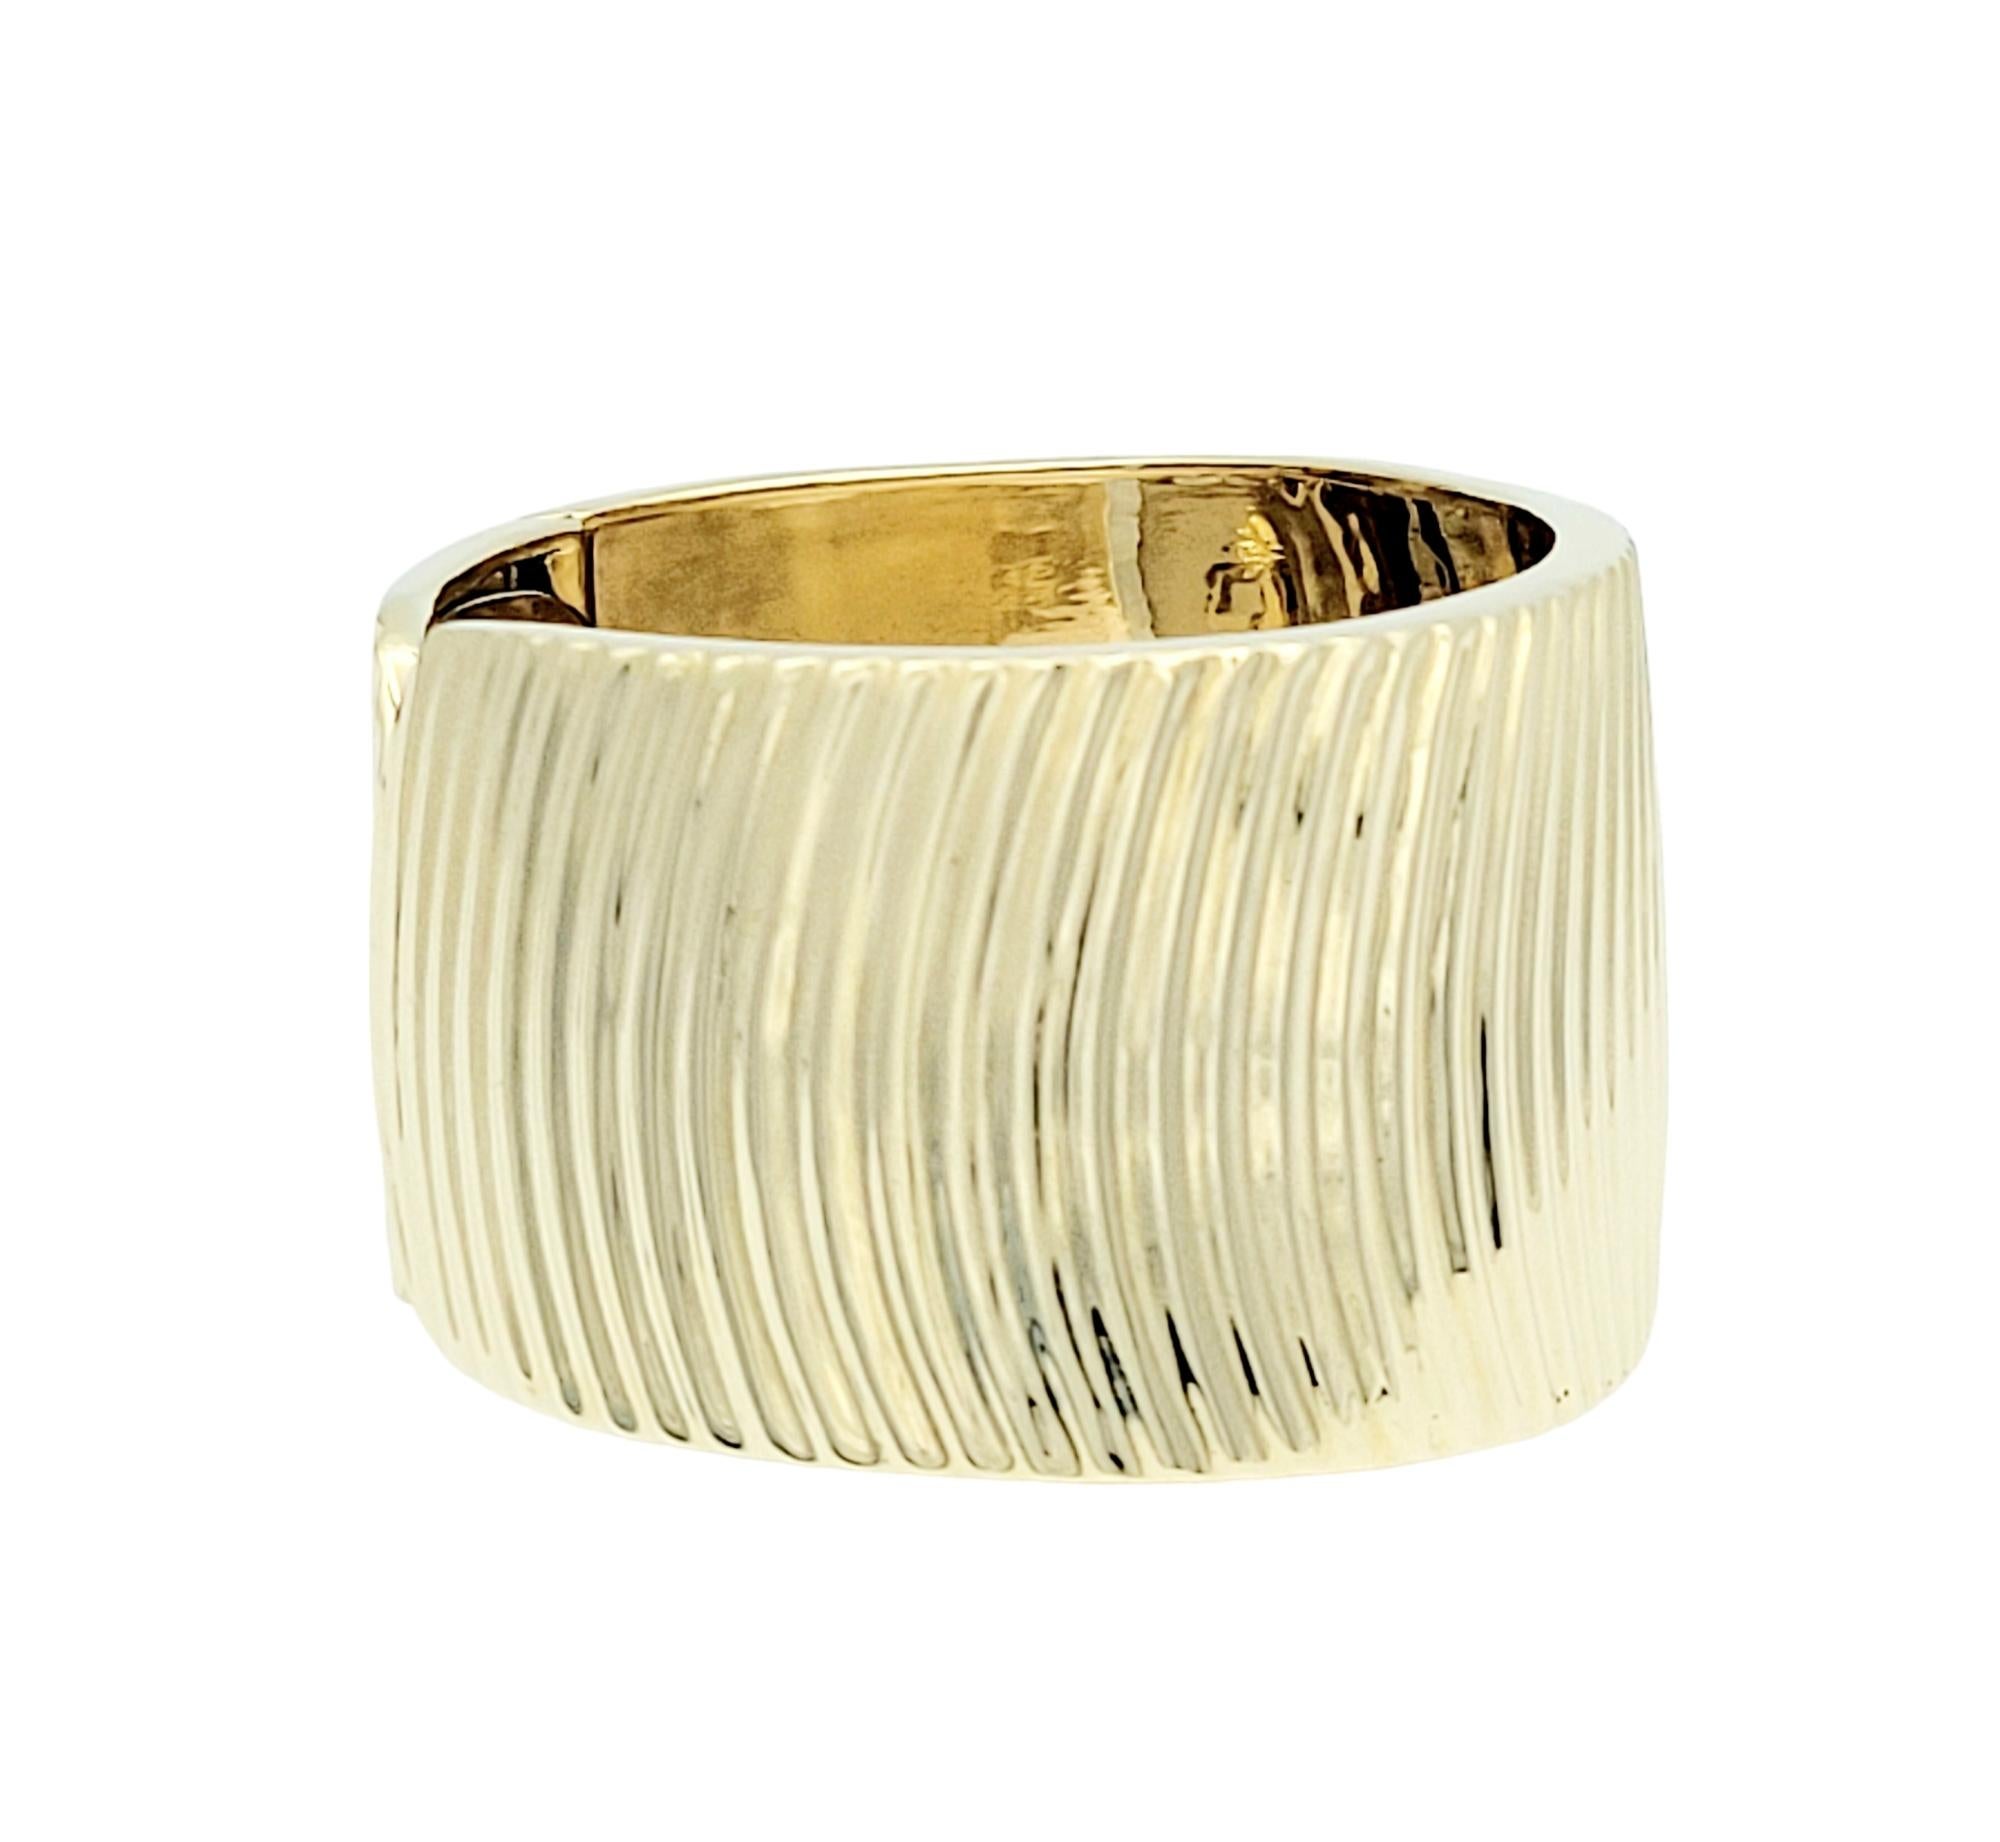 This wide cuff bracelet, crafted in 14 karat yellow gold, is a statement of bold elegance and modern sophistication. The presence of ridges on the bracelet adds texture and visual interest, creating a dynamic and stylish look. The inclusion of a